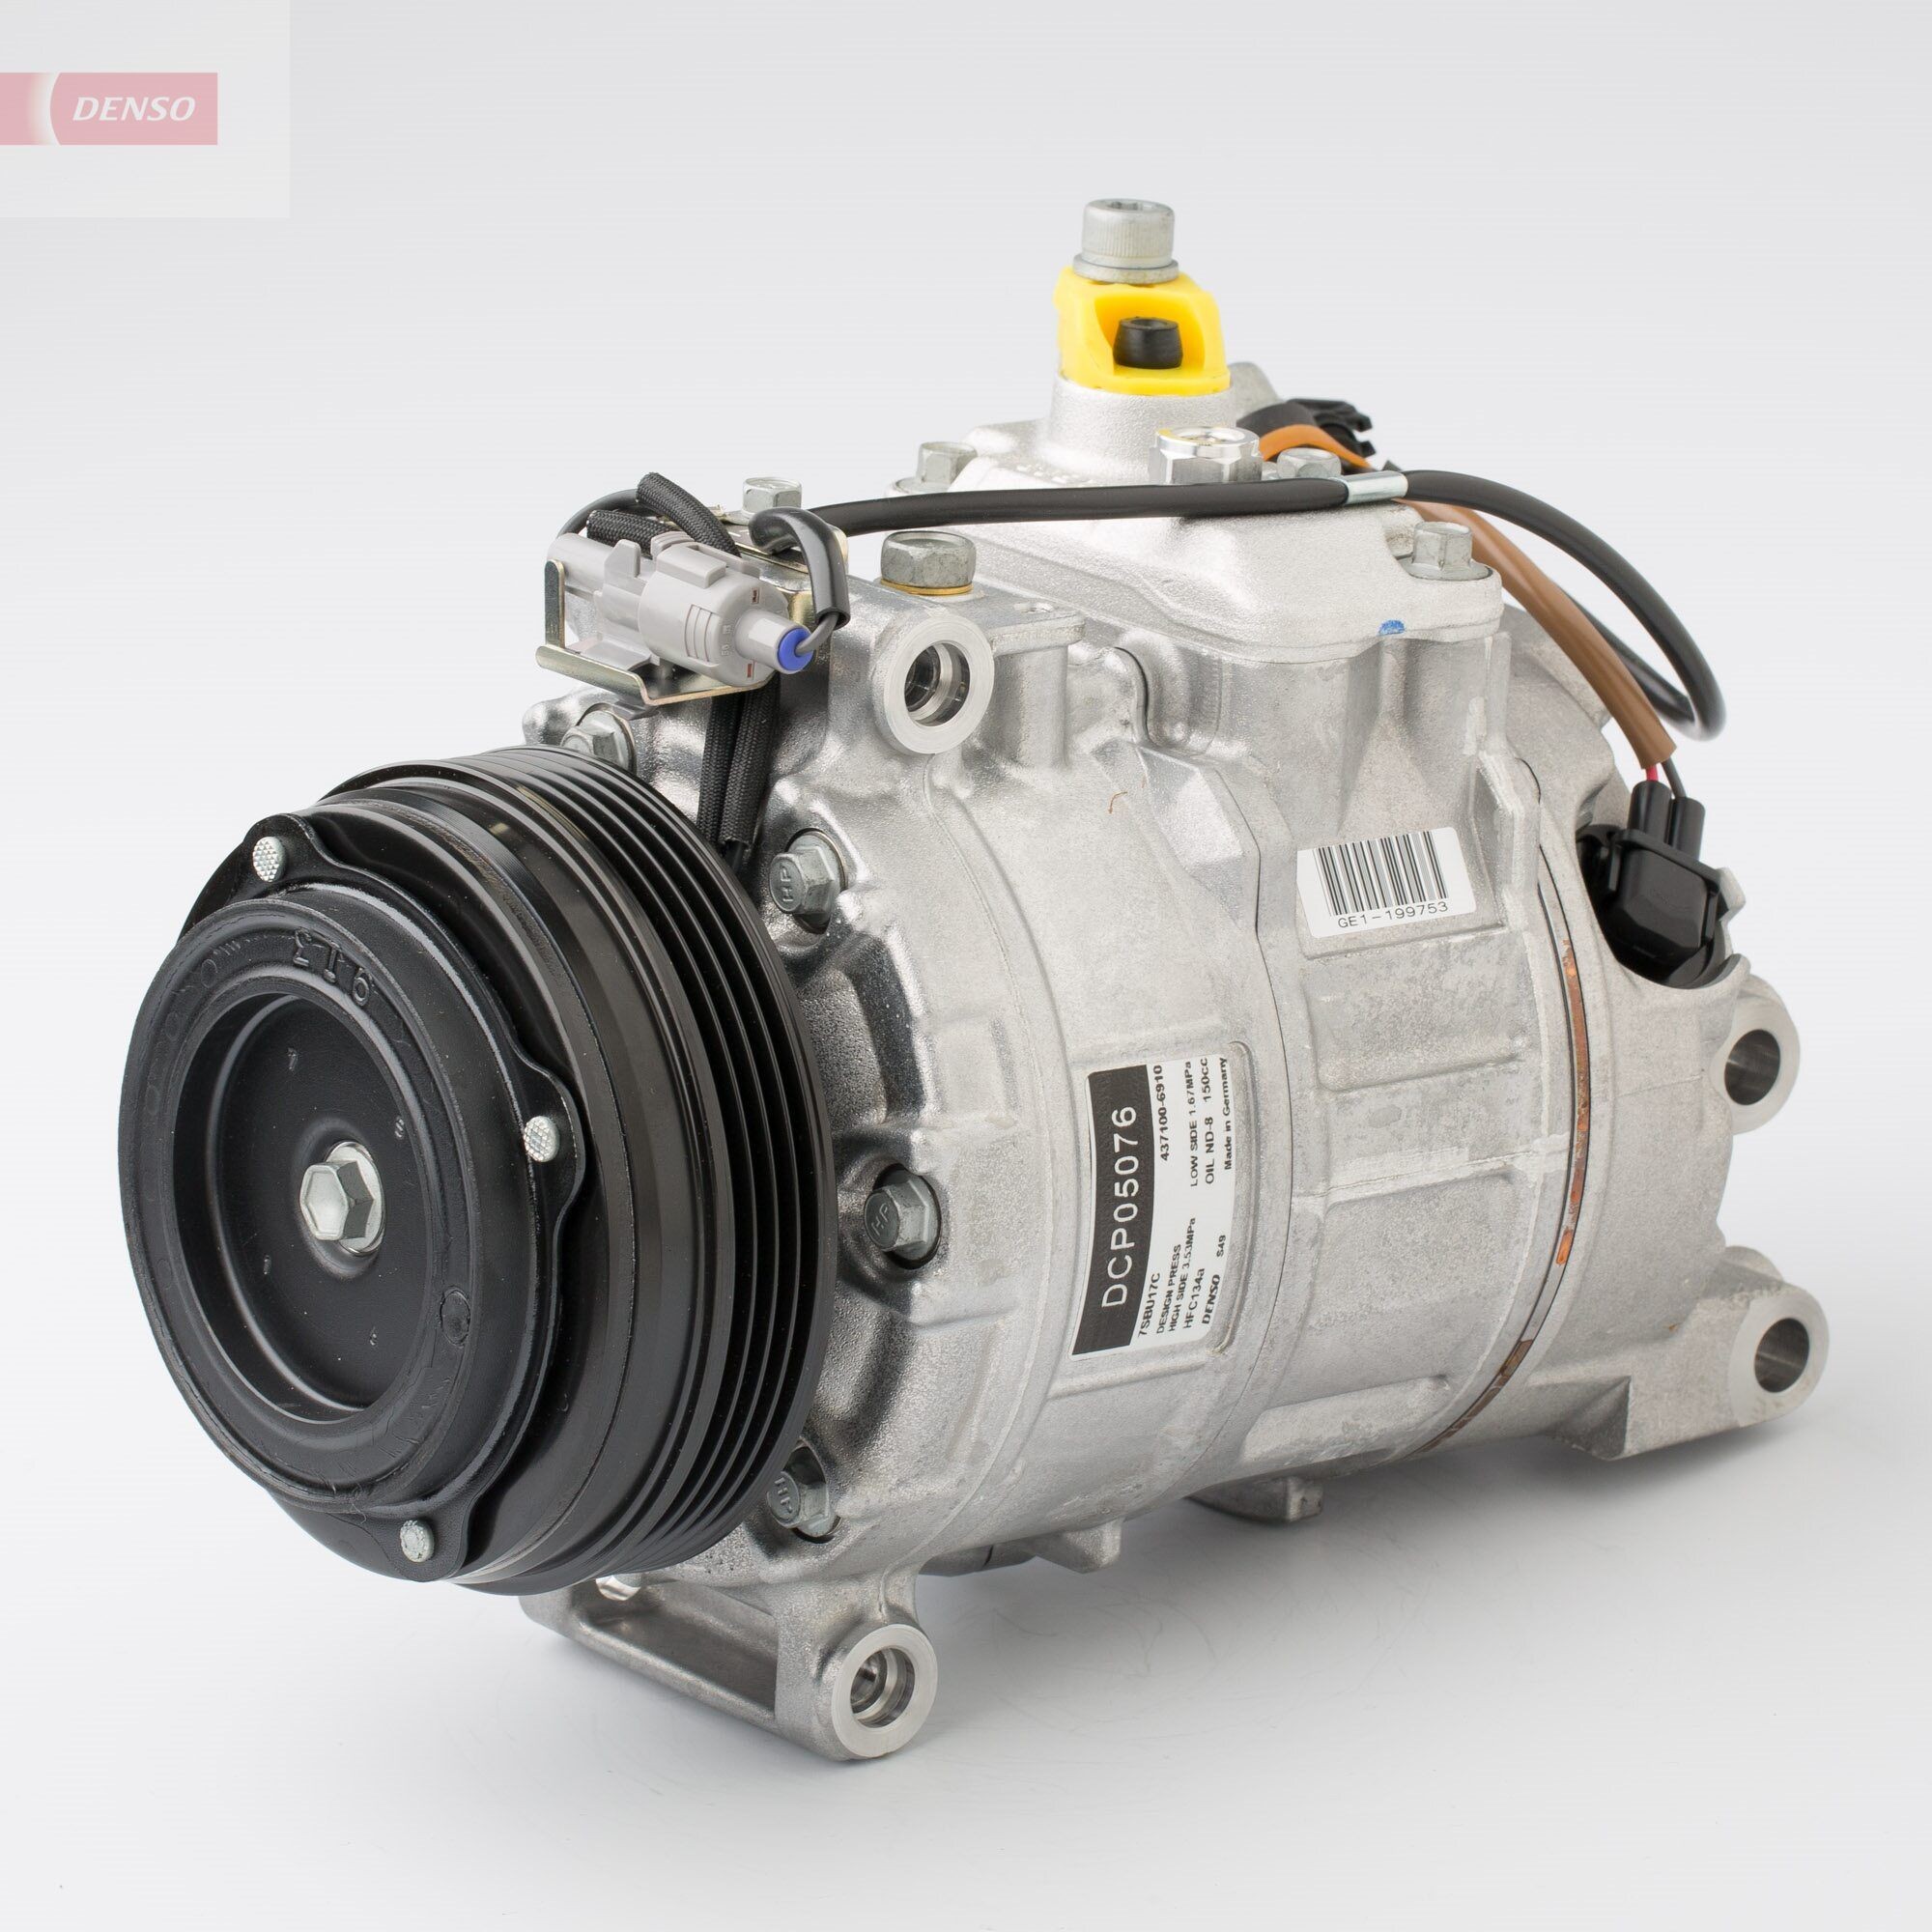 DENSO Air conditioning compressor DCP05076 BMW 5 Series 2014